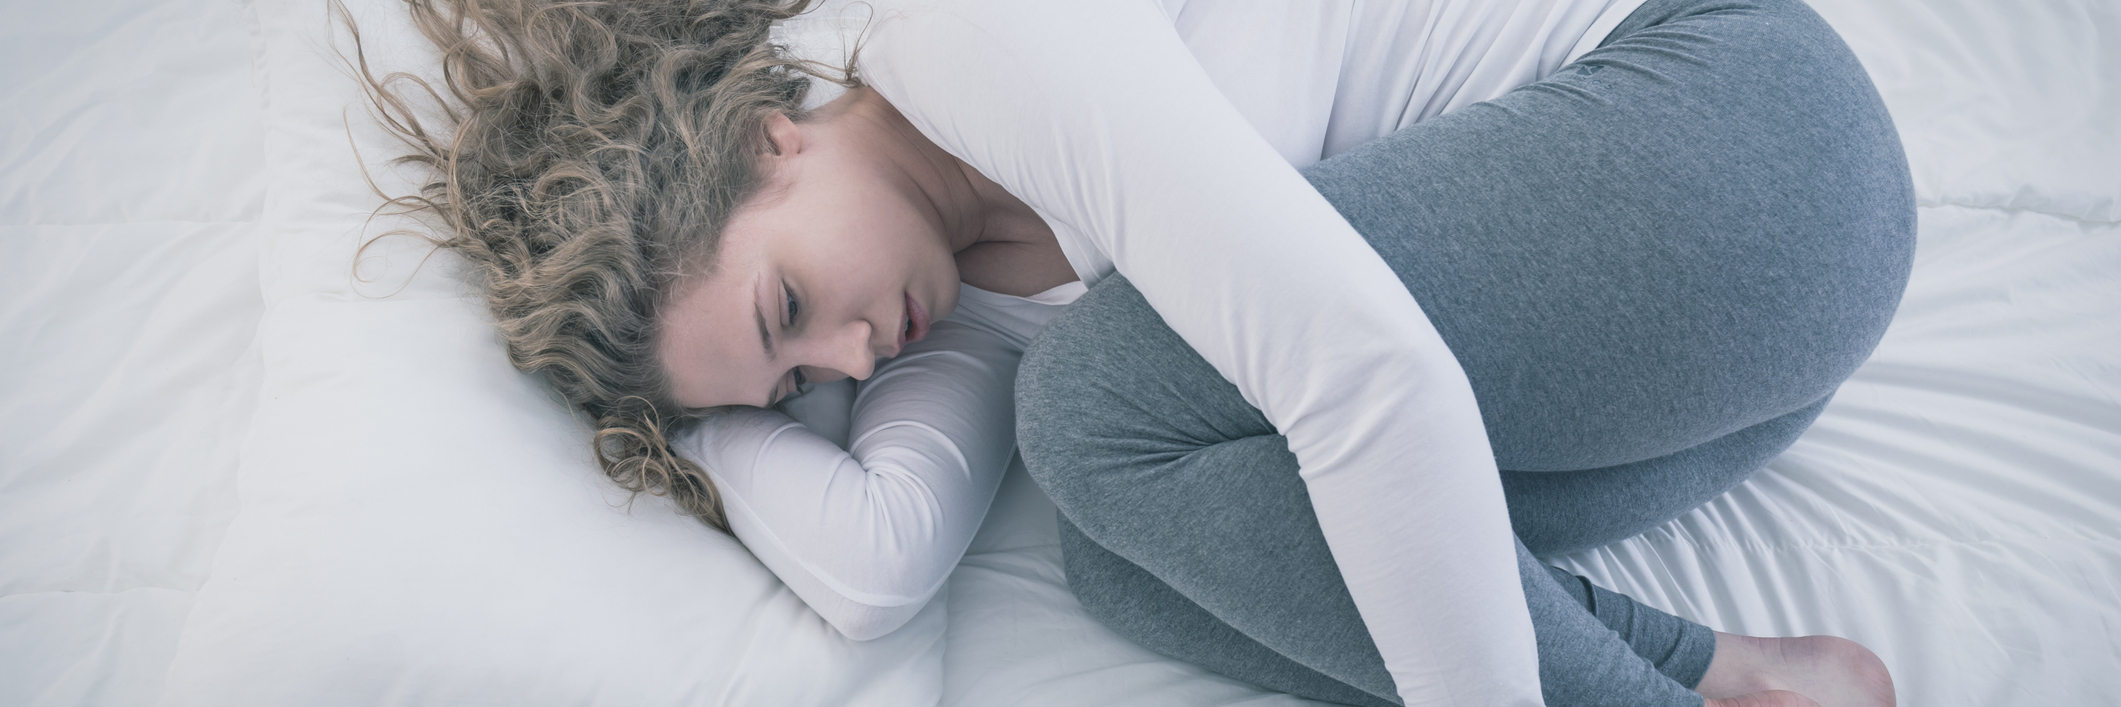 young woman curled up on bed looking depressed